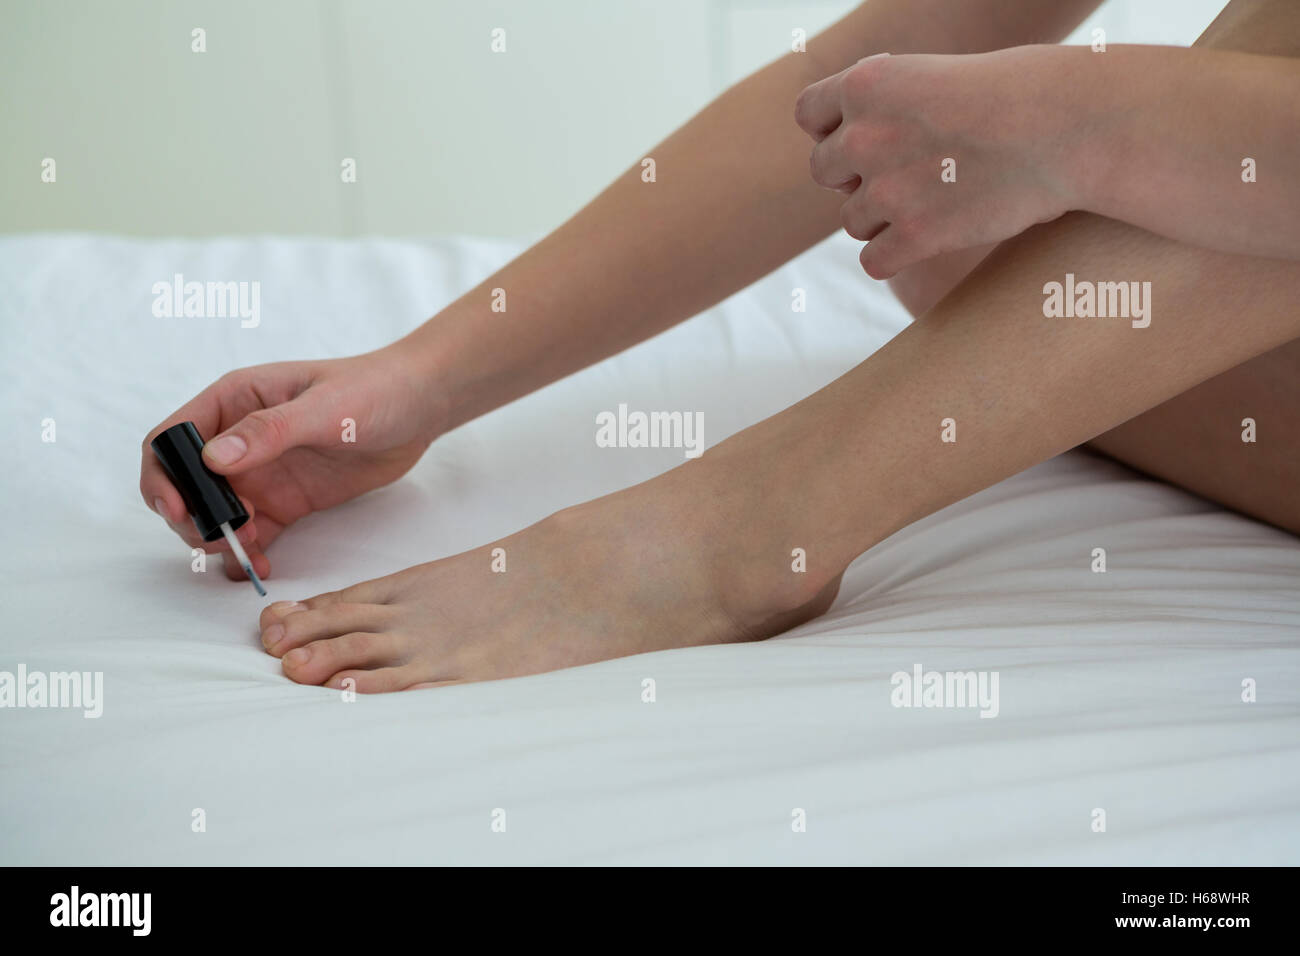 Woman applying nail polish on her toe nails in bedroom Stock Photo